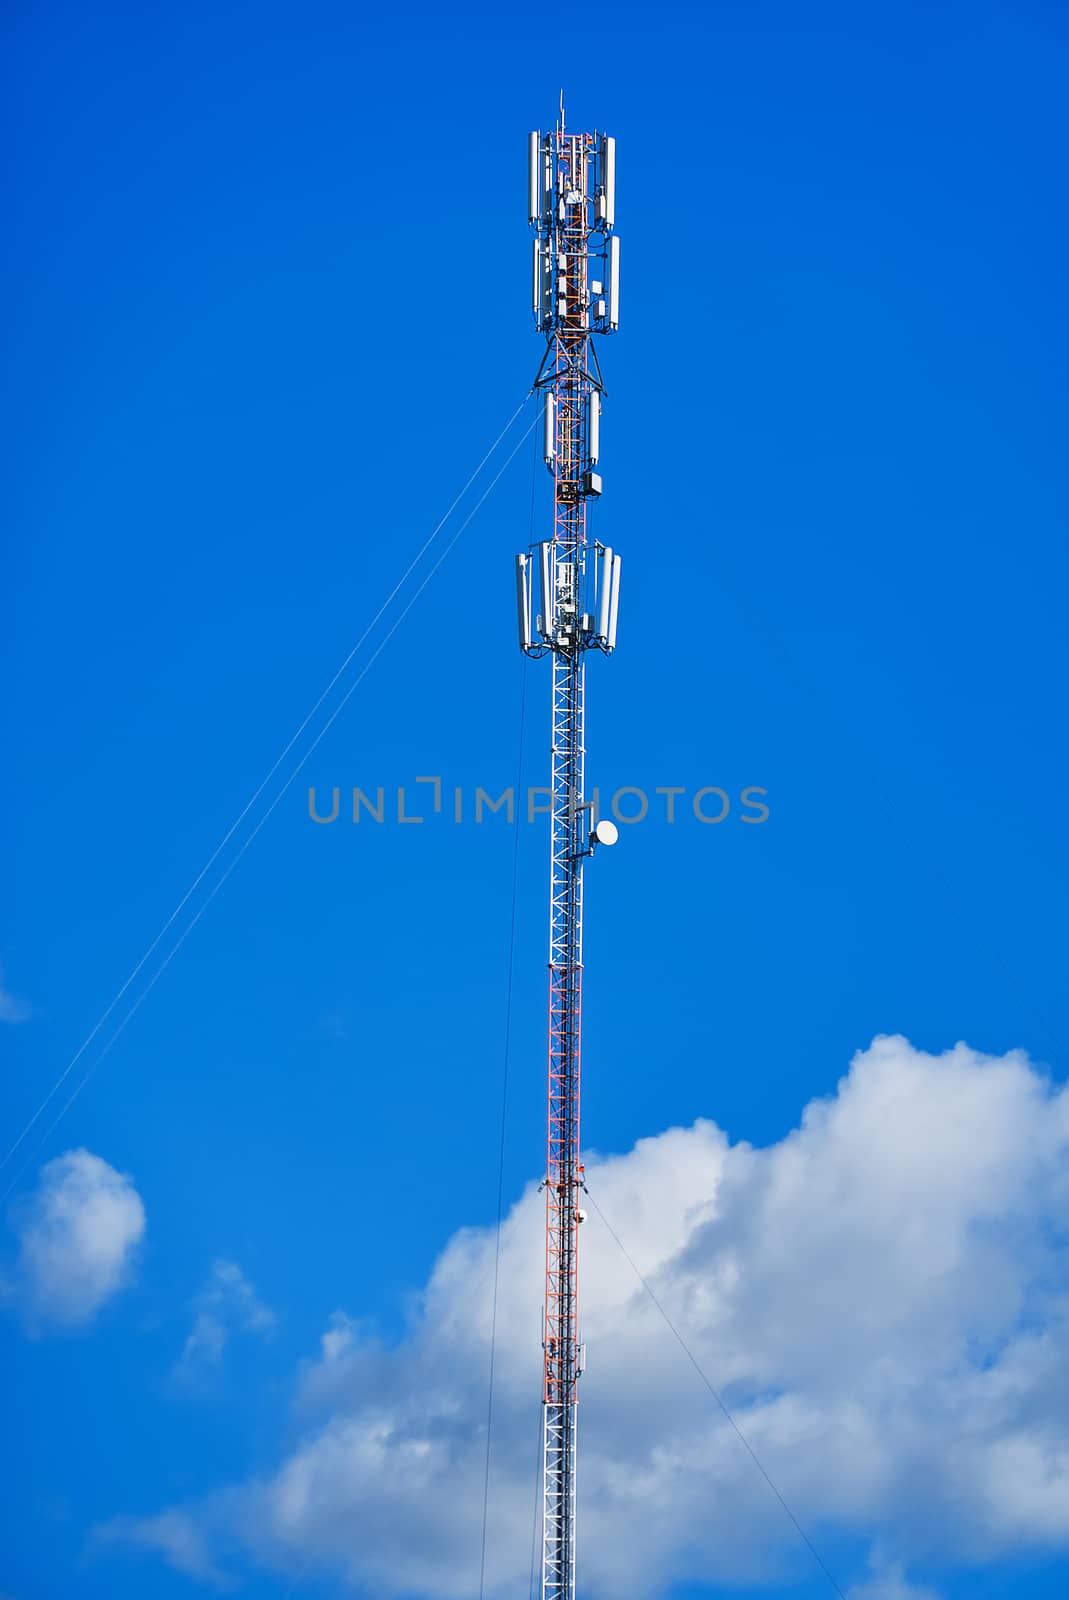 Telecommunication tower of 4G and 5G cellular. Cell Site Base Station. Wireless Communication Antenna Transmitter. Telecommunication tower with antennas against blue sky background